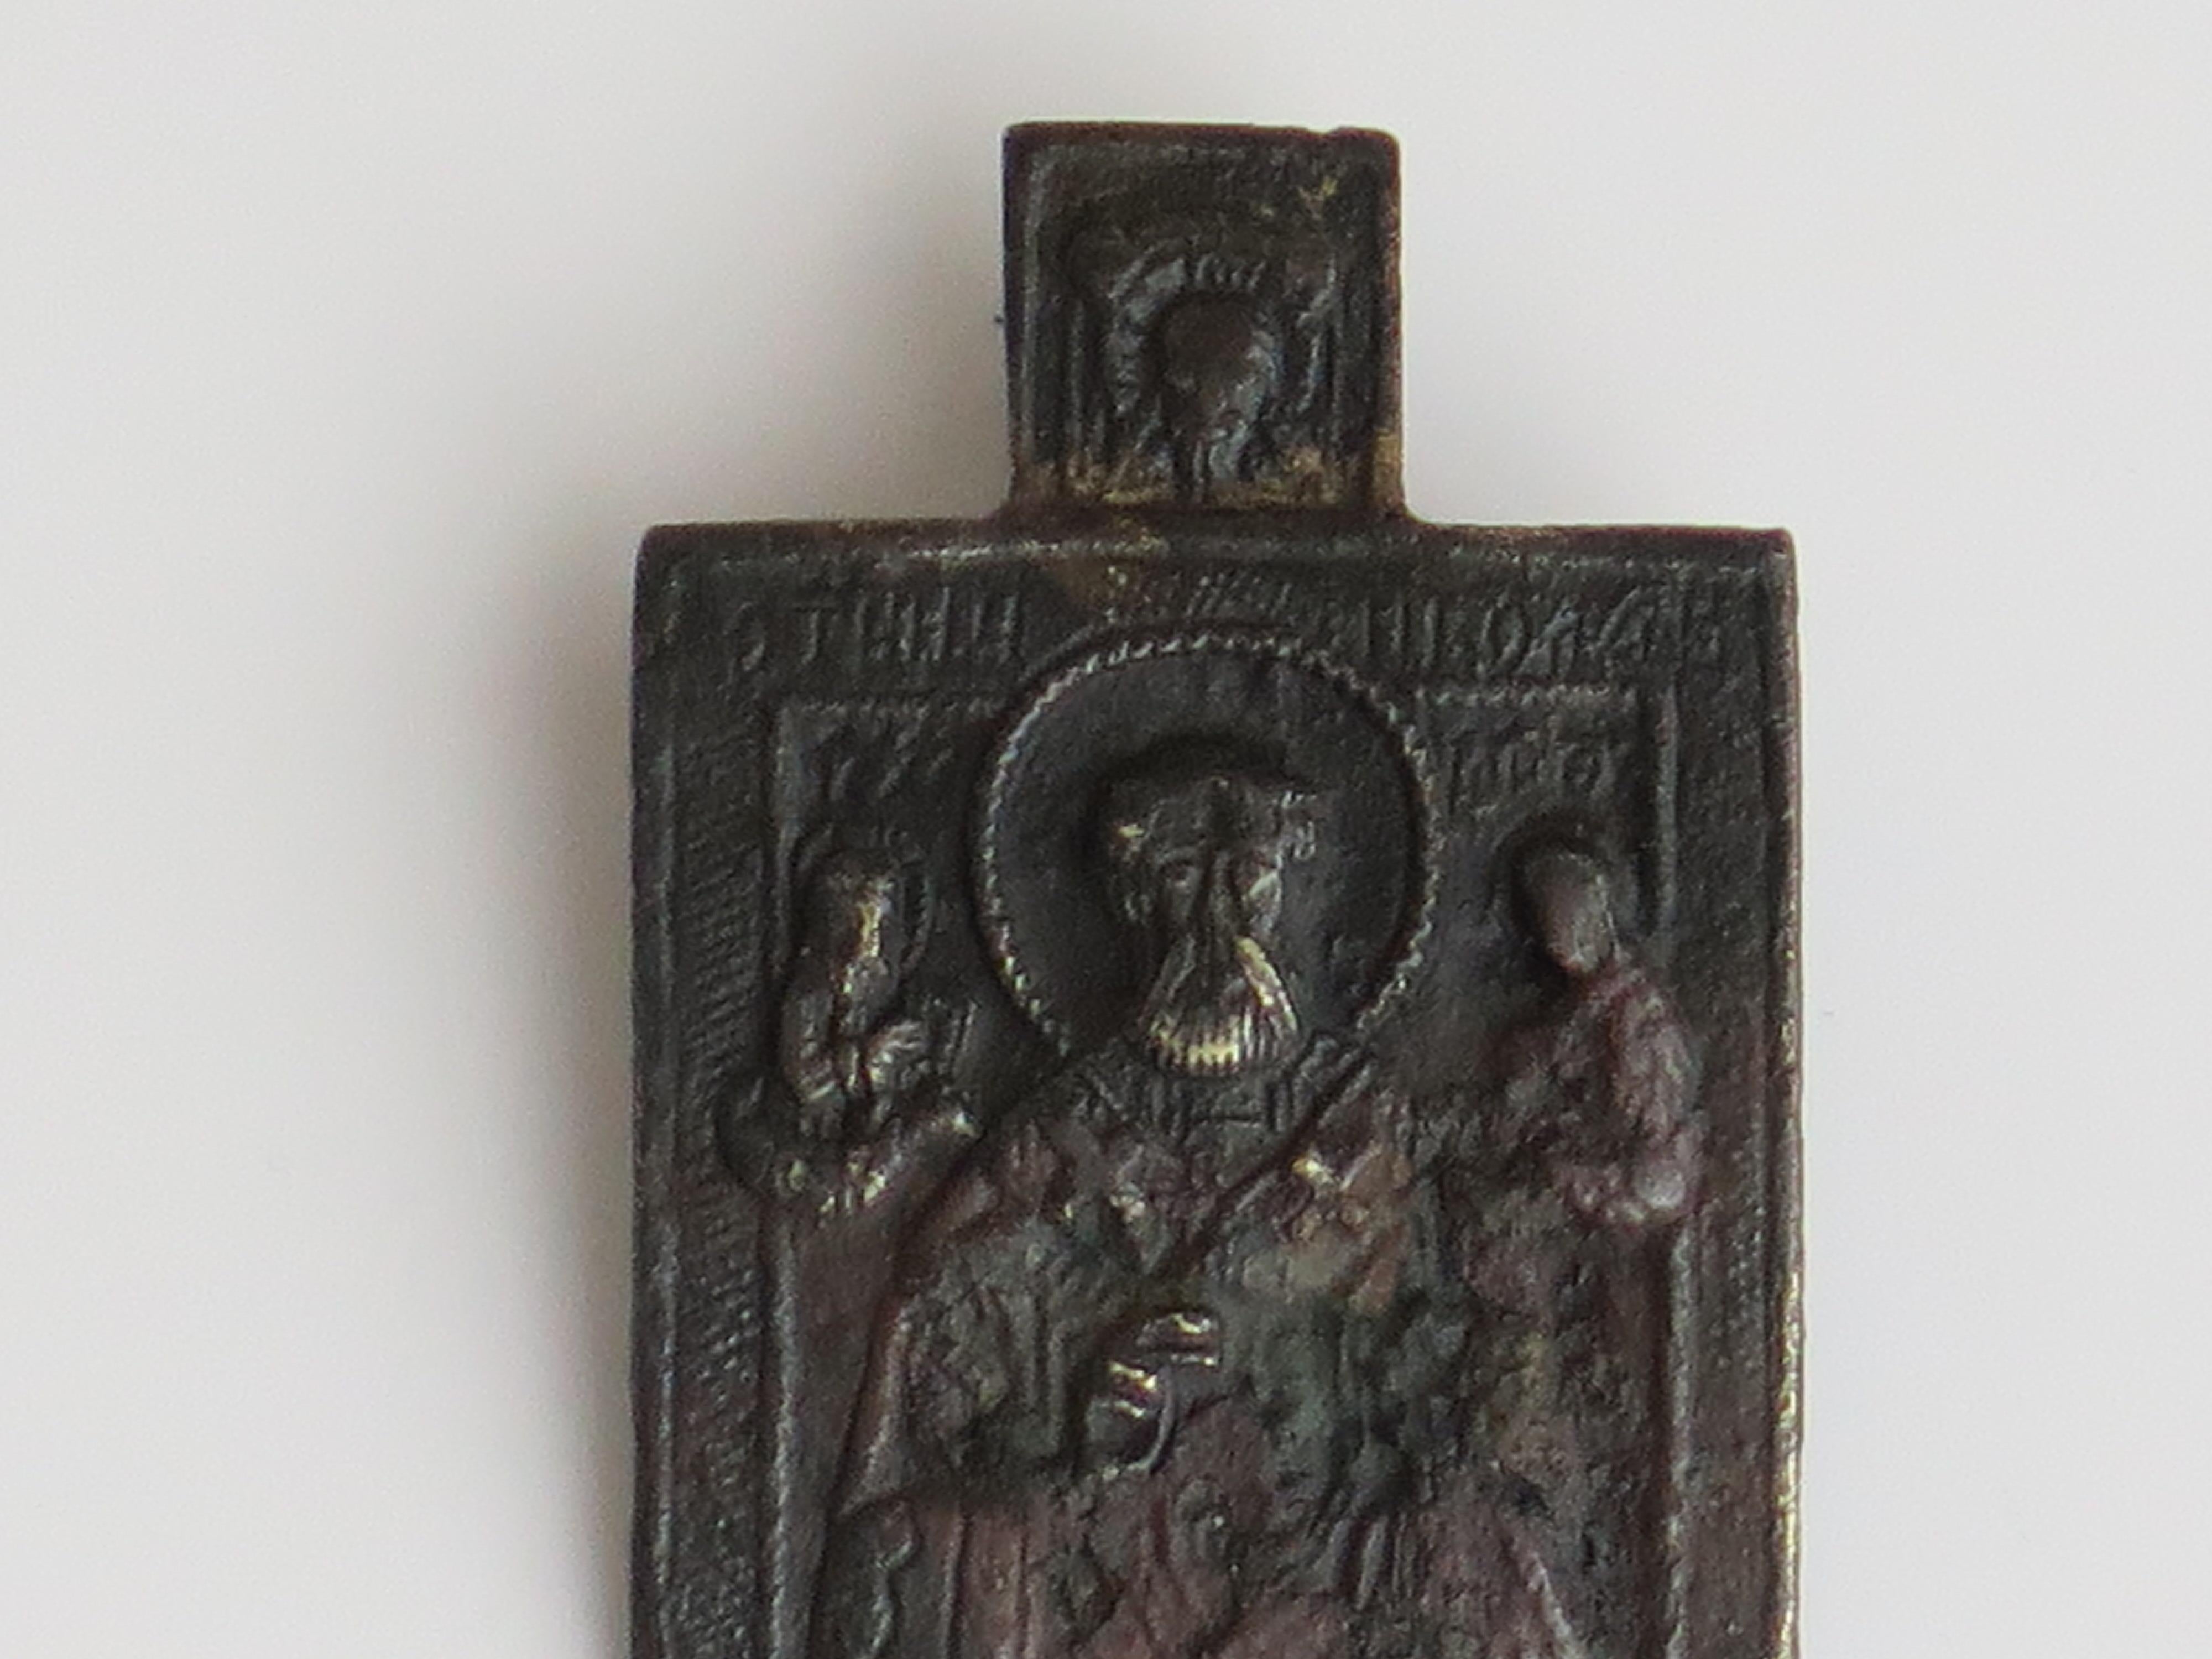 This is an early Russian orthodox travelling Icon, hand made of bronze, which we date to 18th Century or earlier. 

The bronze icon is cast with a main rectangular slightly curved shape with a smaller rectangular tab section above. The reverse has a